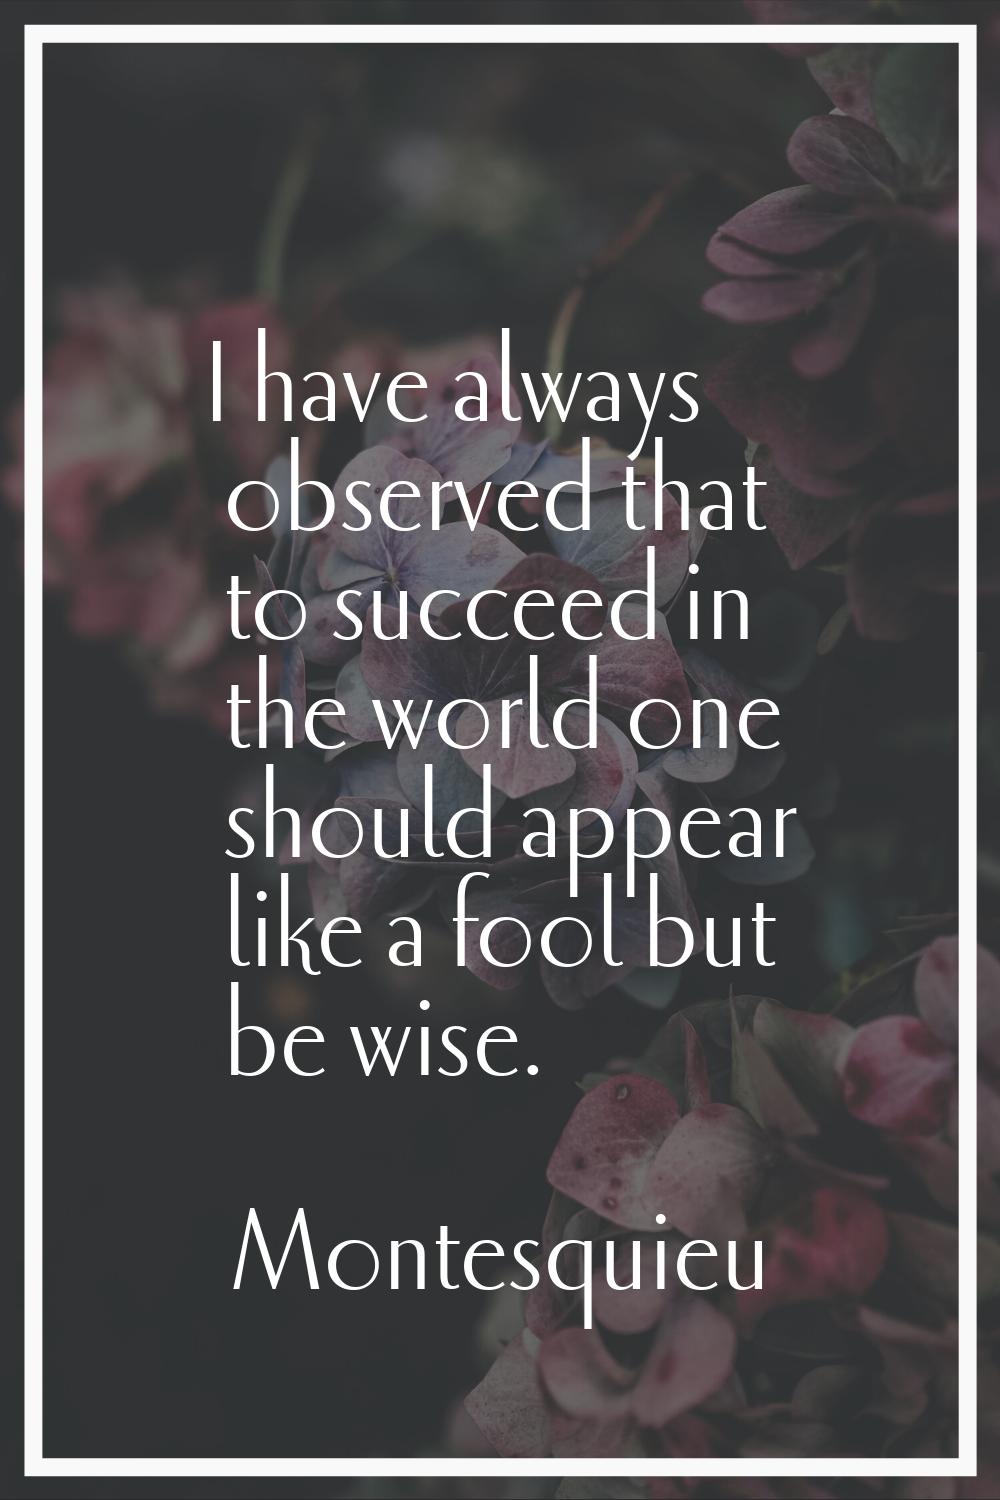 I have always observed that to succeed in the world one should appear like a fool but be wise.